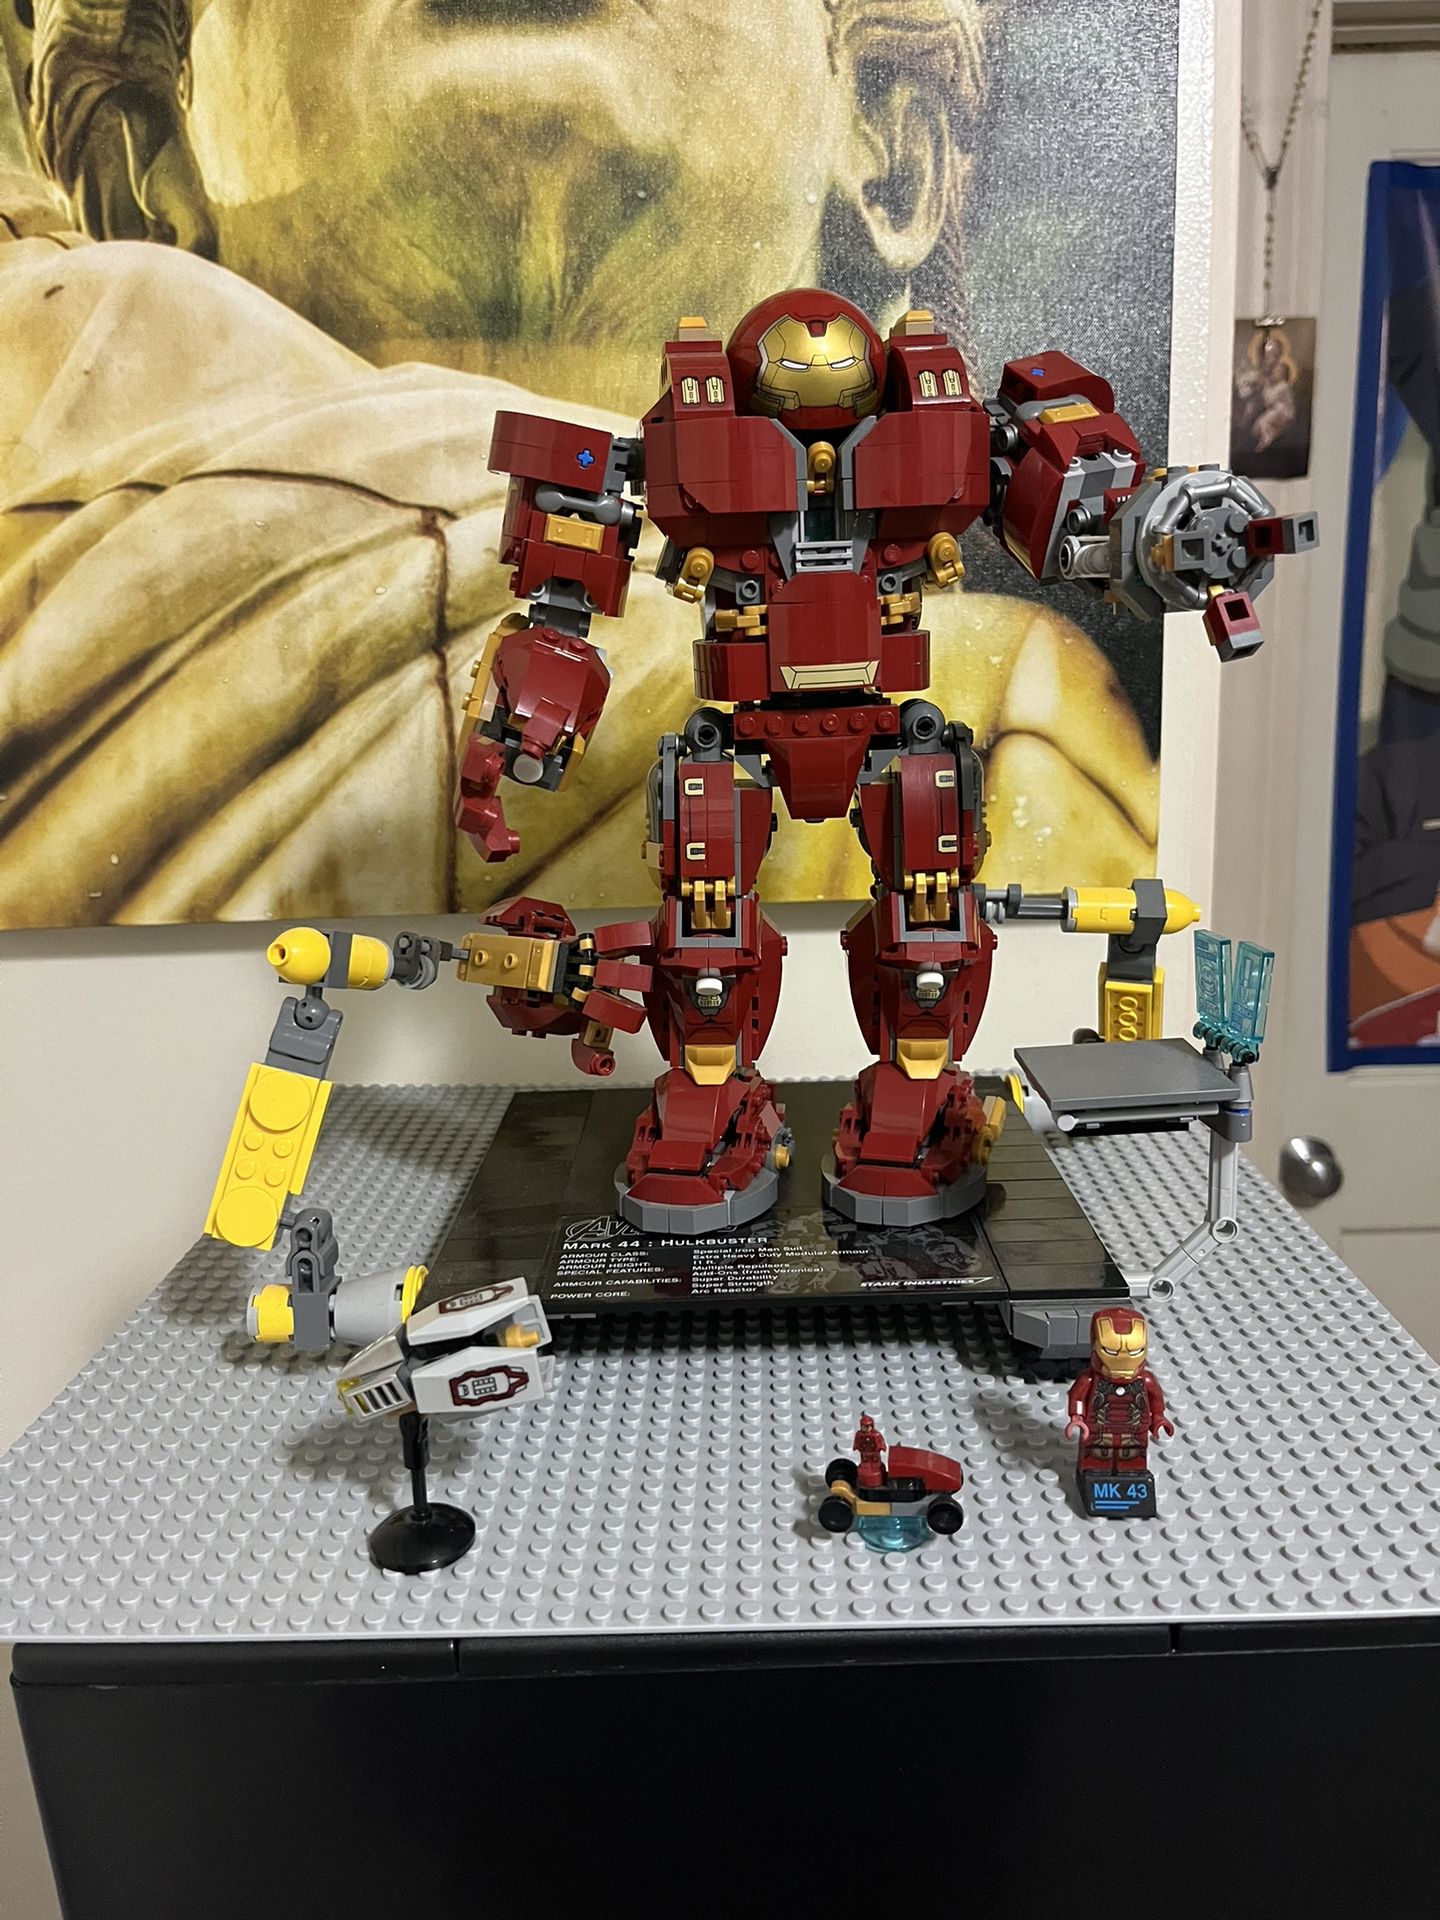 LEGO Marvel Super Heroes Avengers: Infinity War The Hulkbuster: Ultron Edition 76105 Building Kit (1363 Pieces